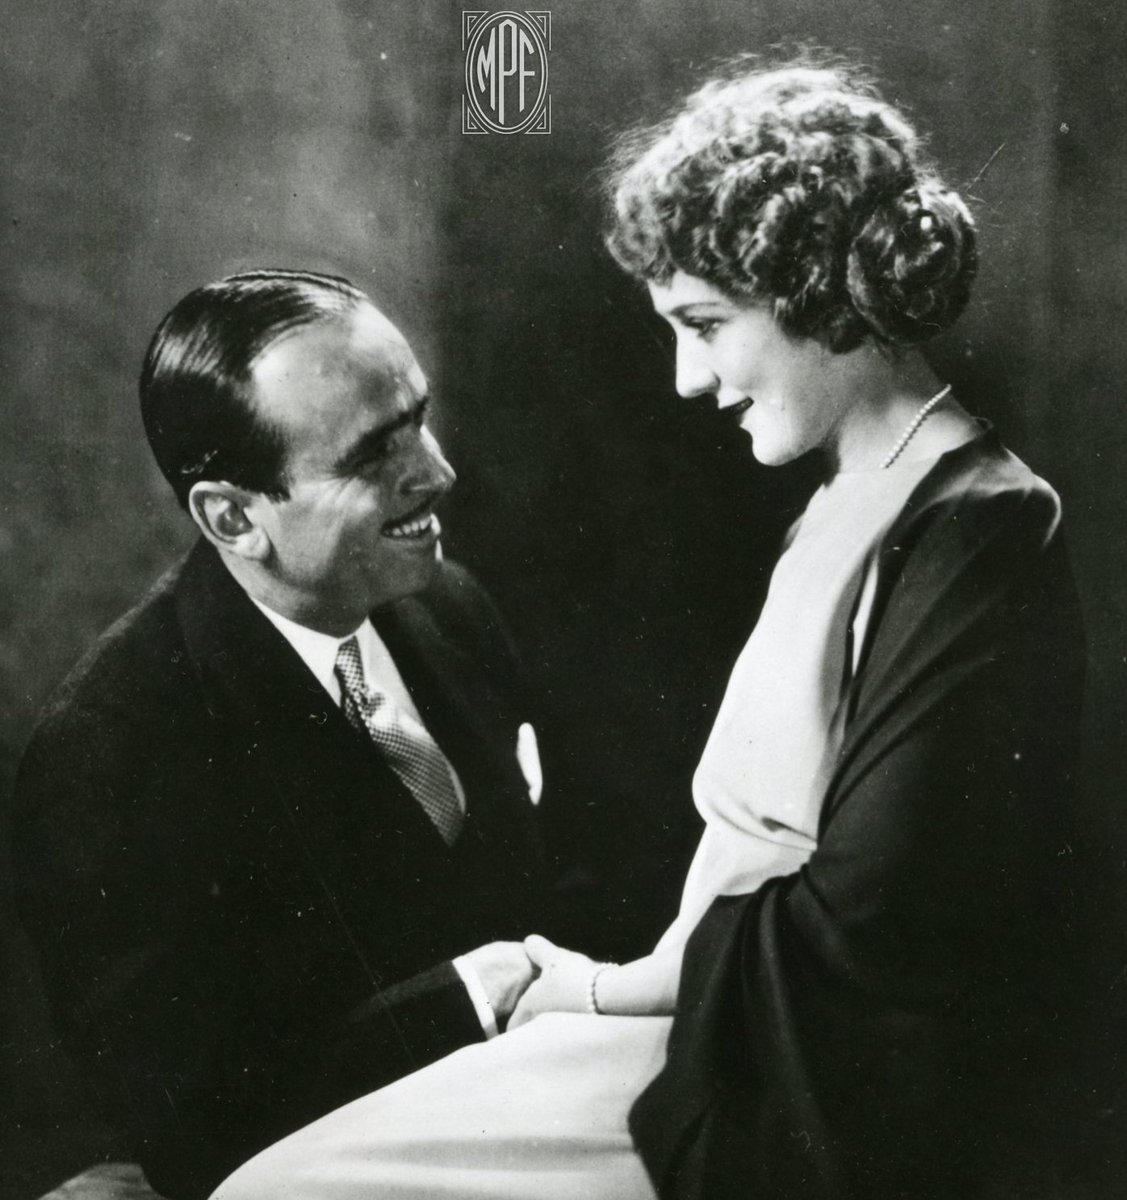 Today we celebrate that Douglas and Mary married #OnThisDay in 1920. Their love is captured by #EdwardSteichen in 1924. #marypickford #douglasfairbanks #dougandmary #truelove #weddingday